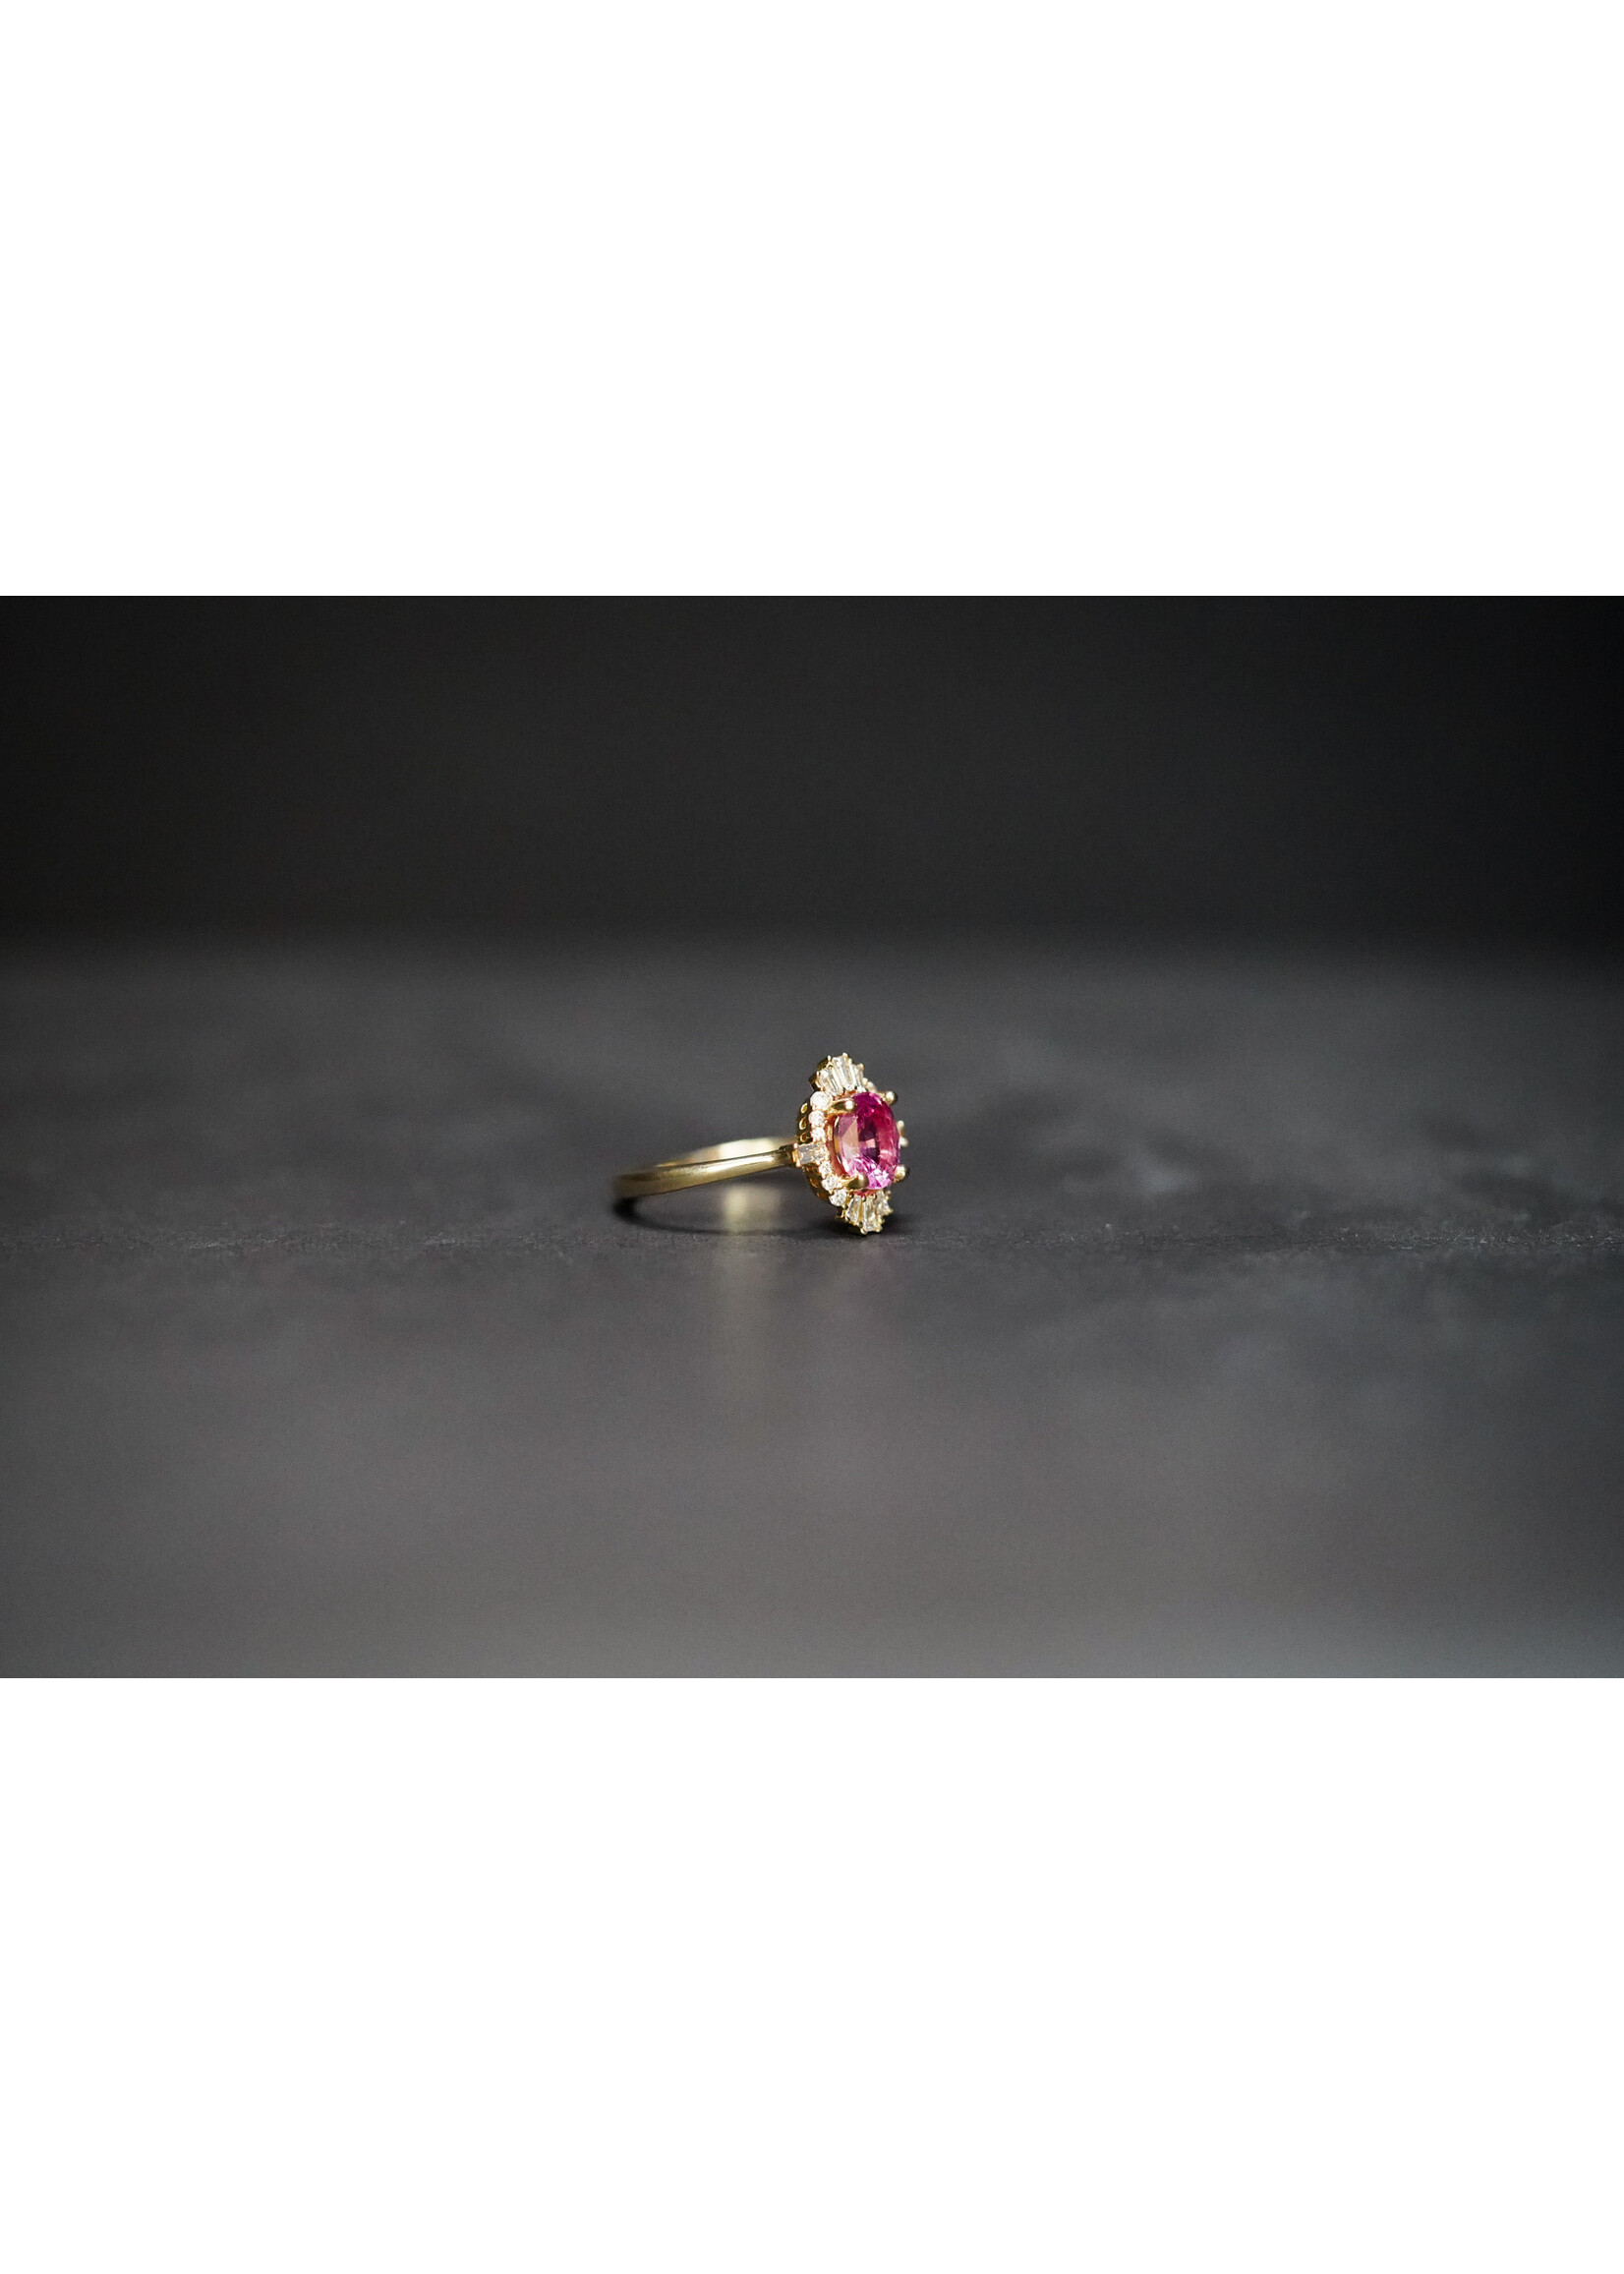 14KY 3.27g 1.75ctw (1.53ctr) Pink Oval Sapphire & Diamond Fashion Ring (size 7)